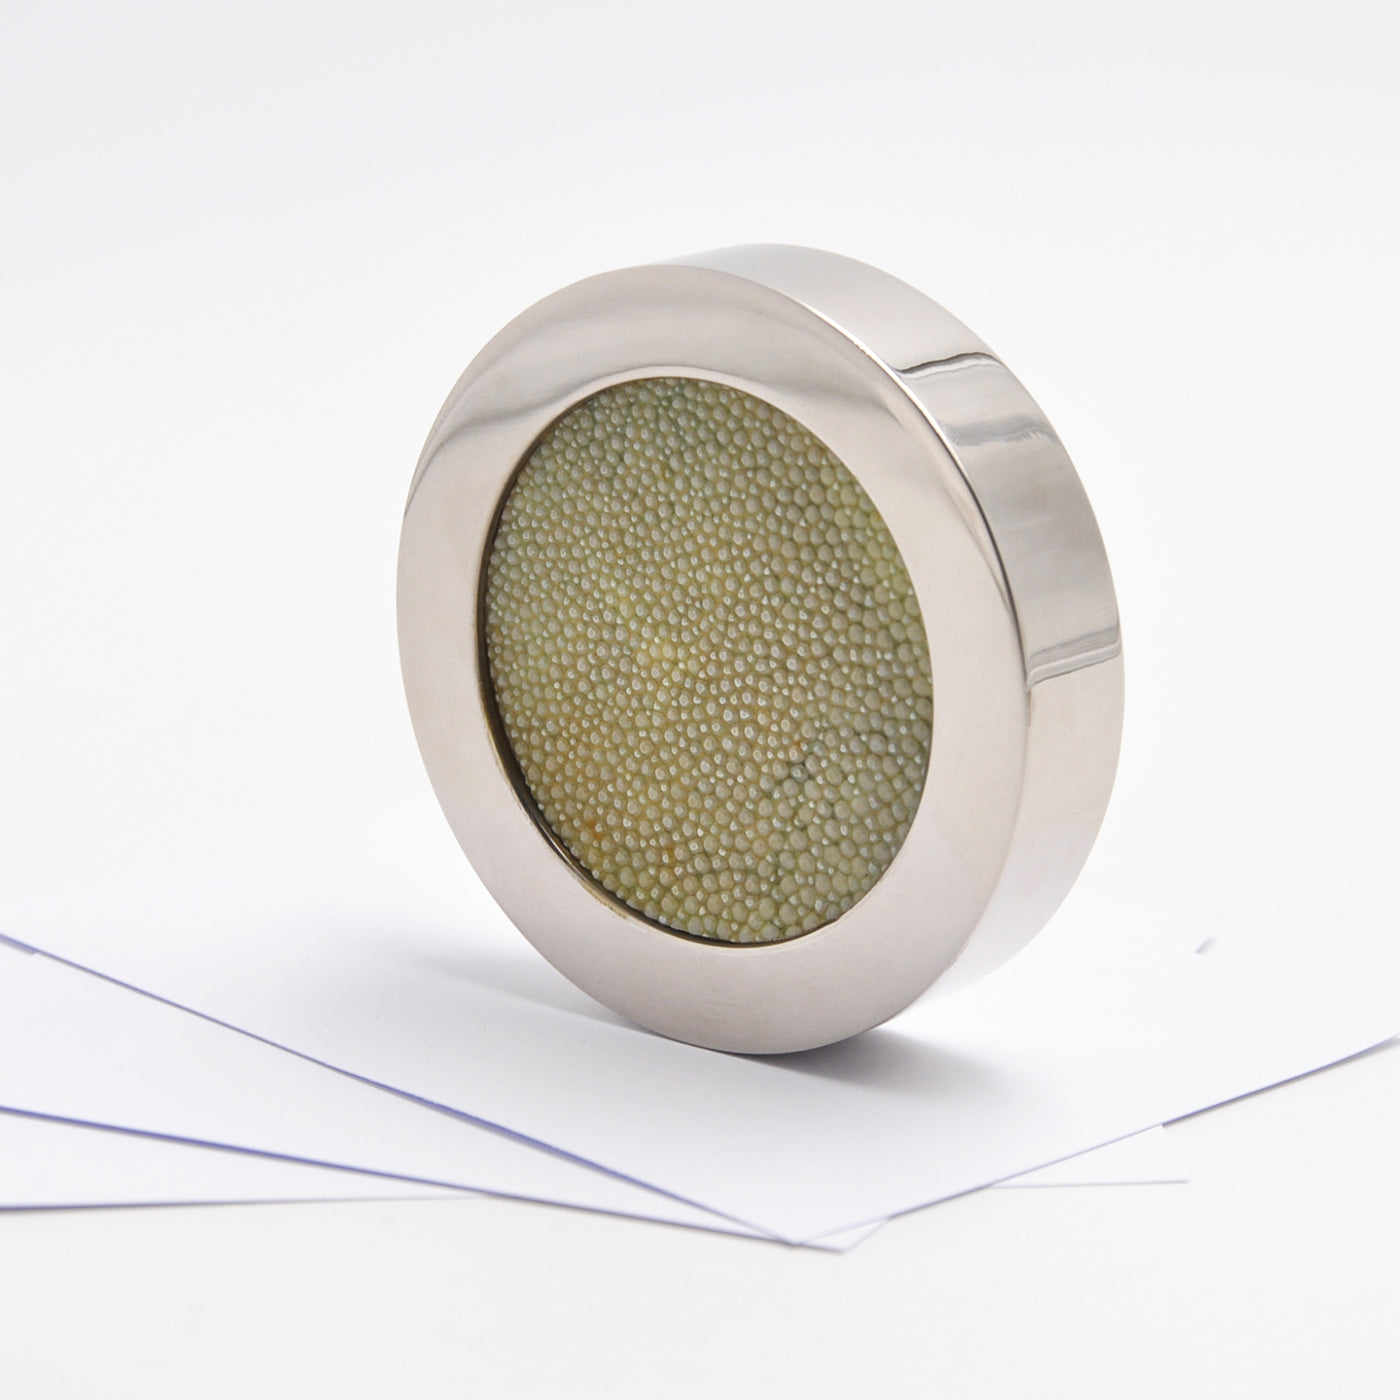 Circular Light-Green Shagreen Leather Paperweight by Nino Basso - Alternative view 2